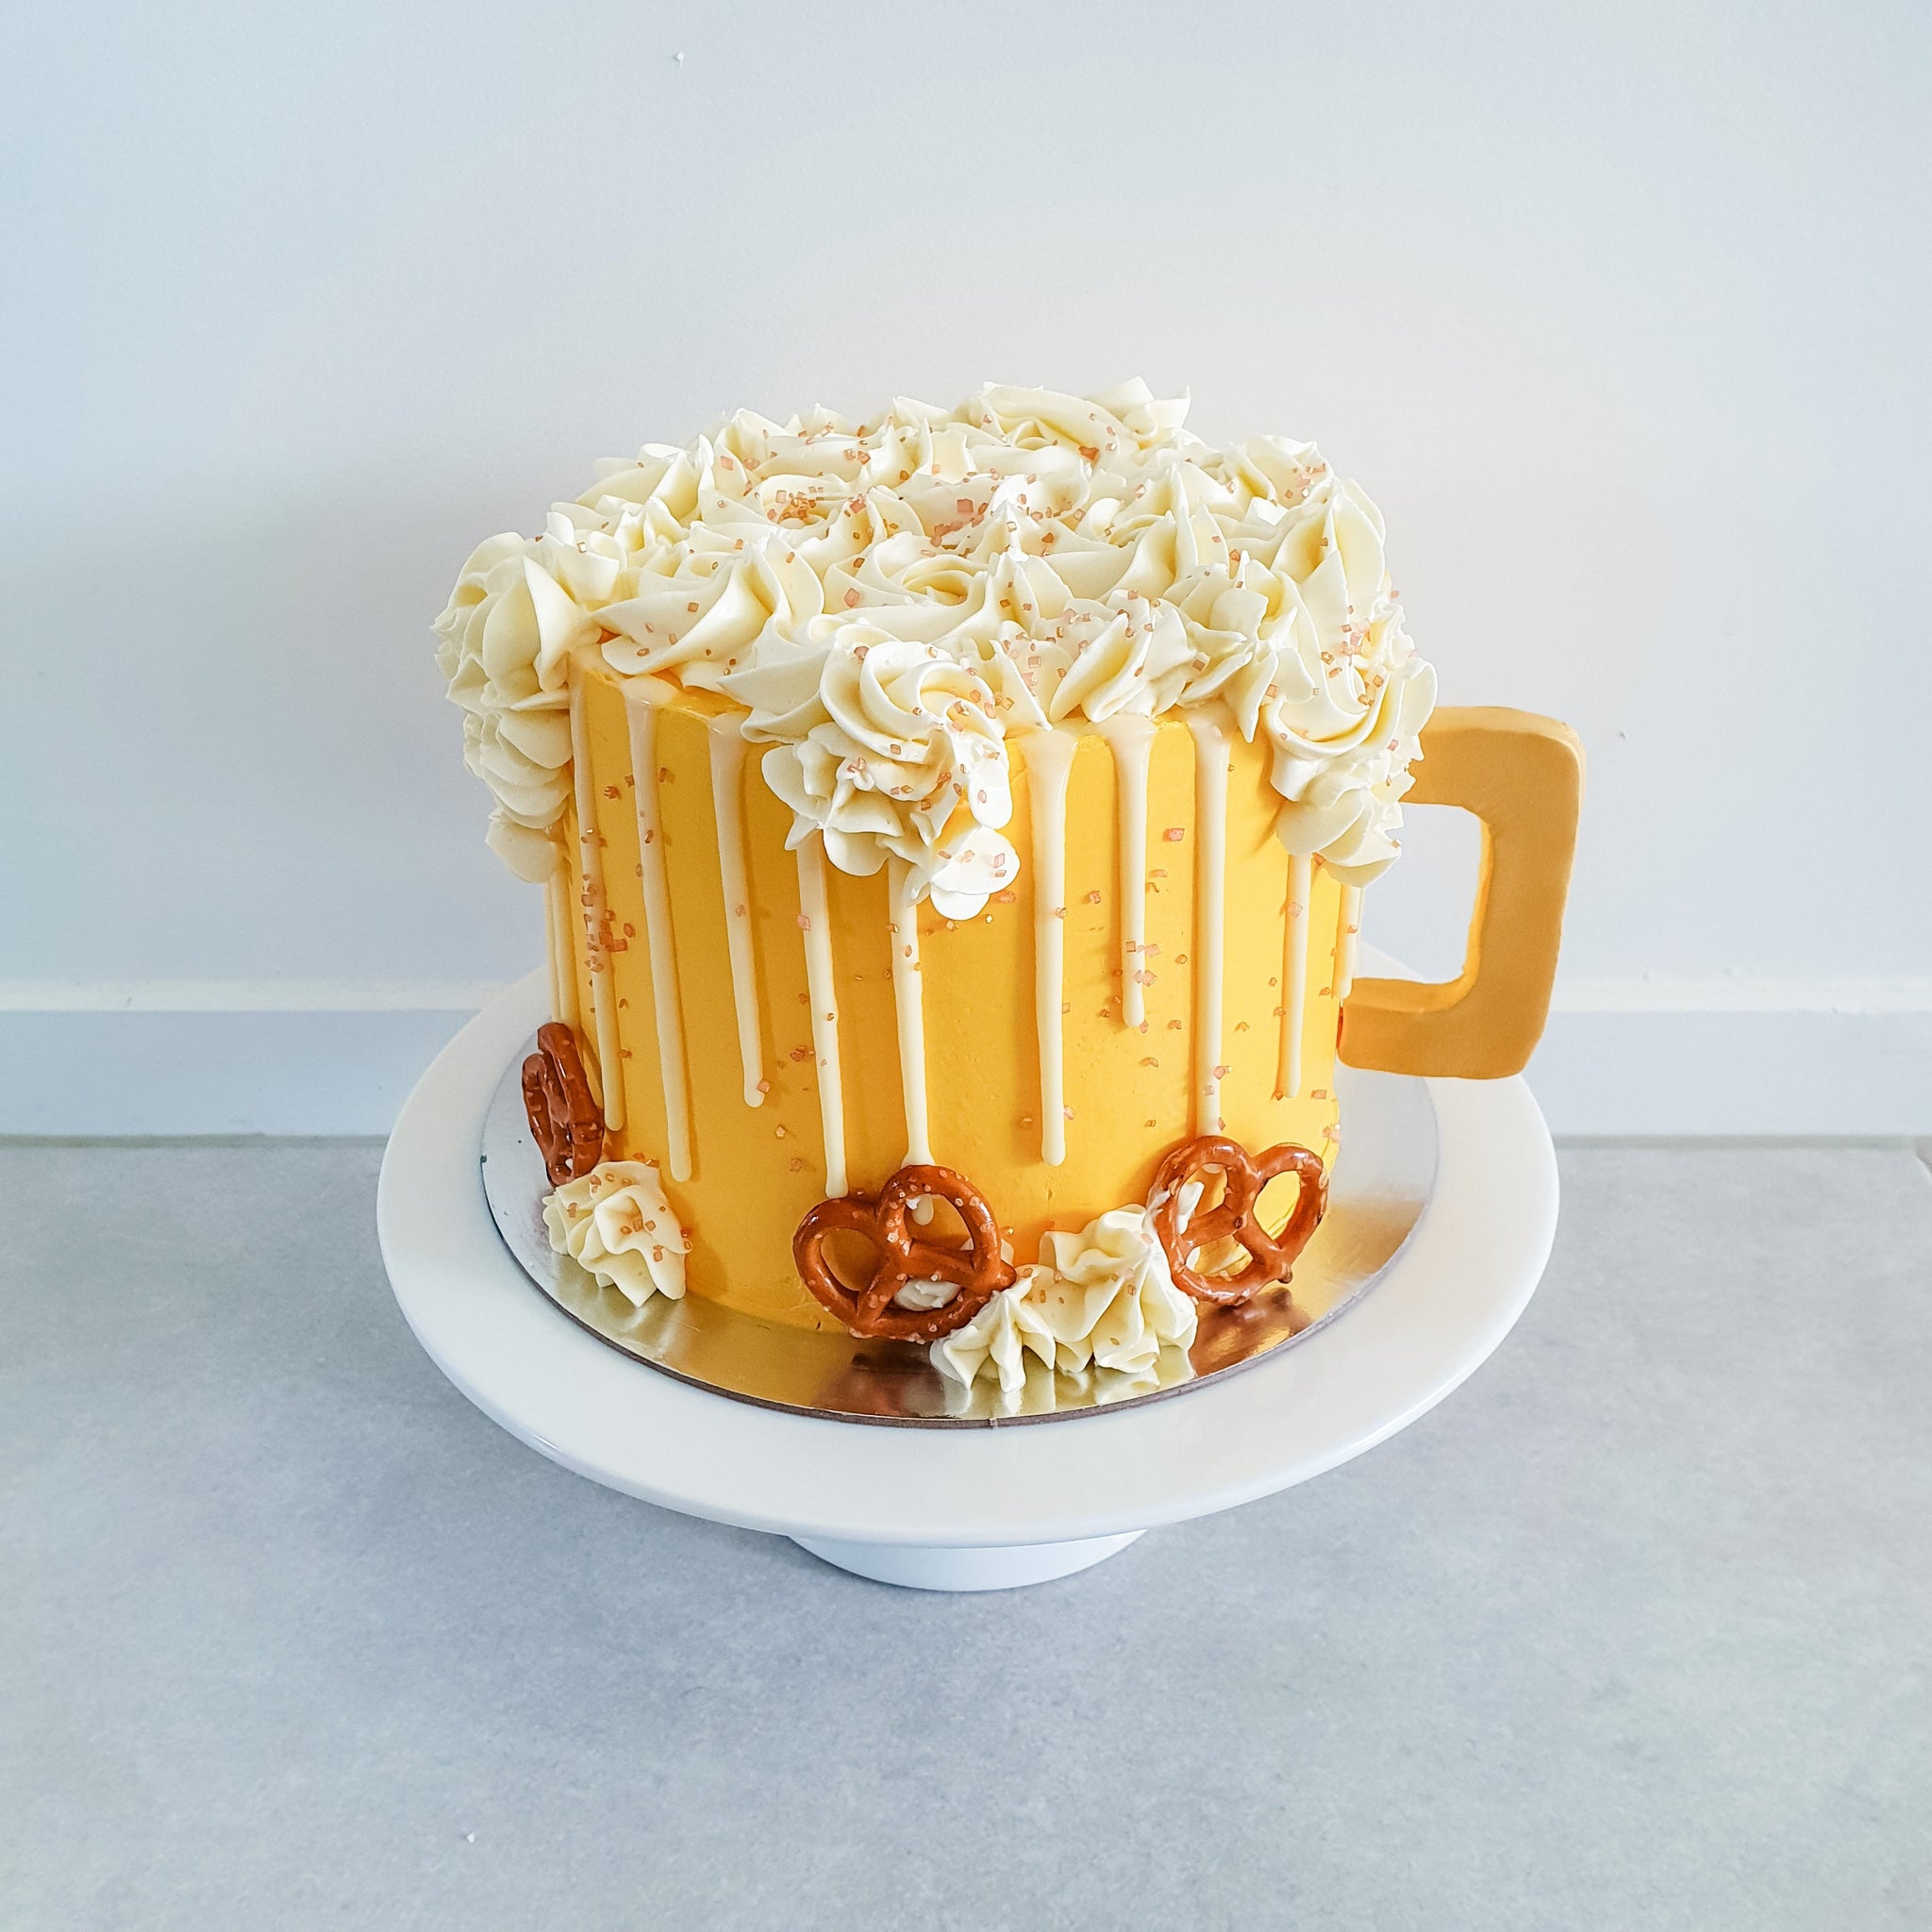 Make an Awesome Craft Beer Cake in 5 Minutes - Using Cans